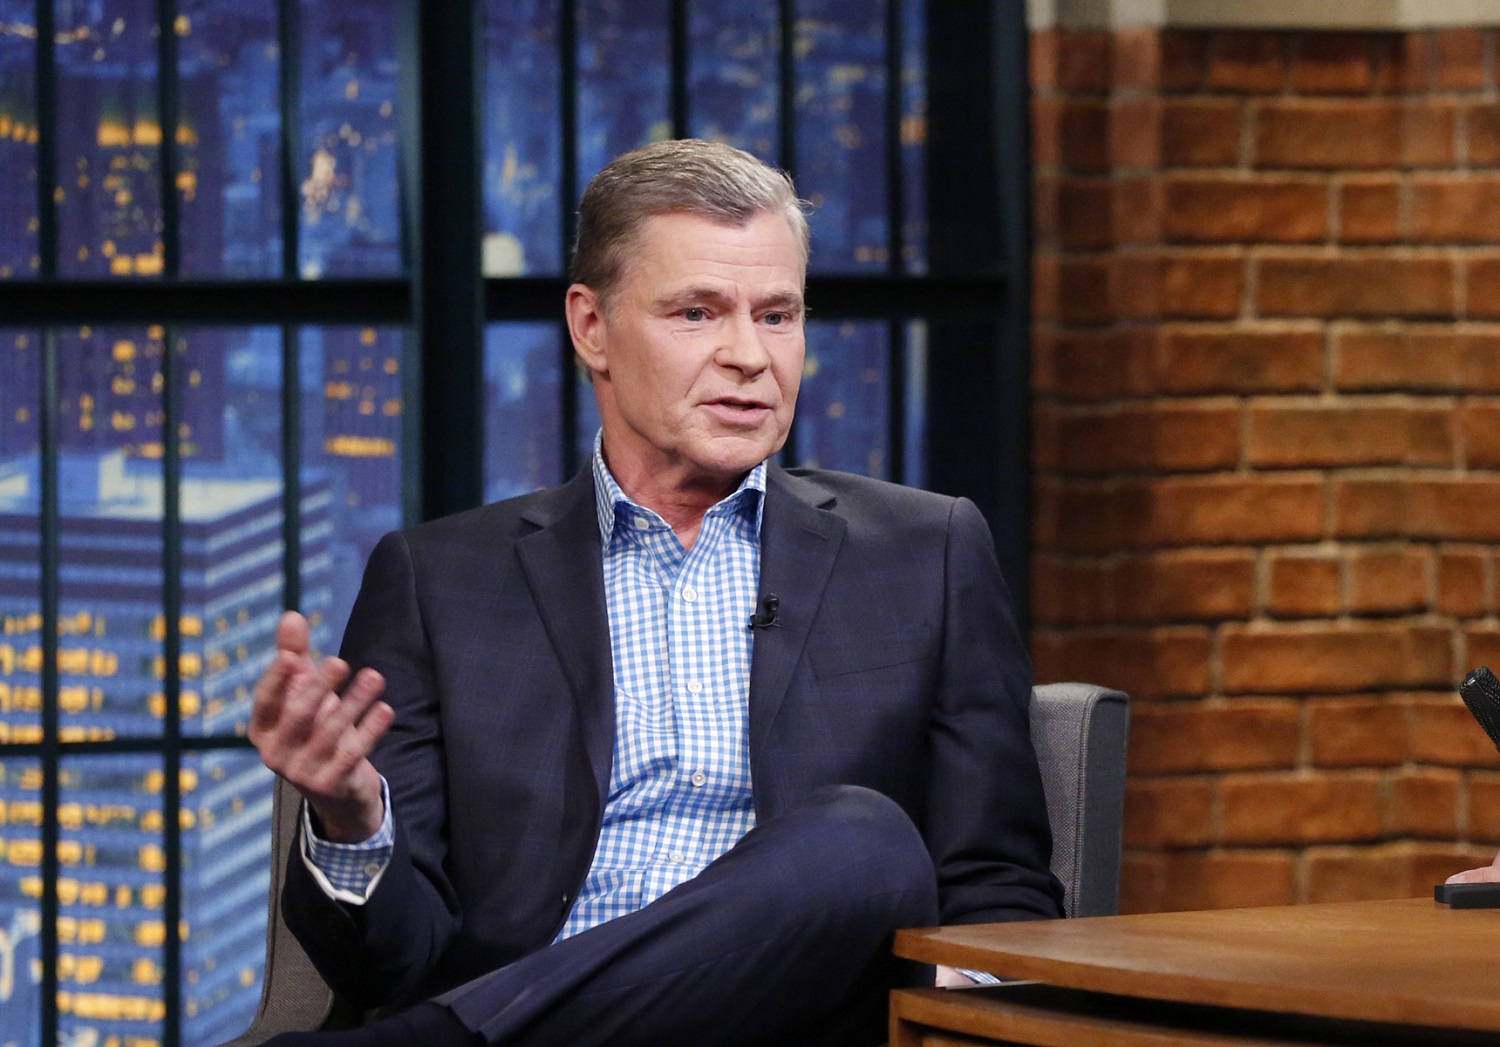 Dan Patrick became fascinated with the newly launched ESPN sports cable network while still in college and reached out to anchor Bob Ley for advice on how to get a job there. | Lloyd Bishop/NBCU Photo Bank/NBCUniversal via Getty Images